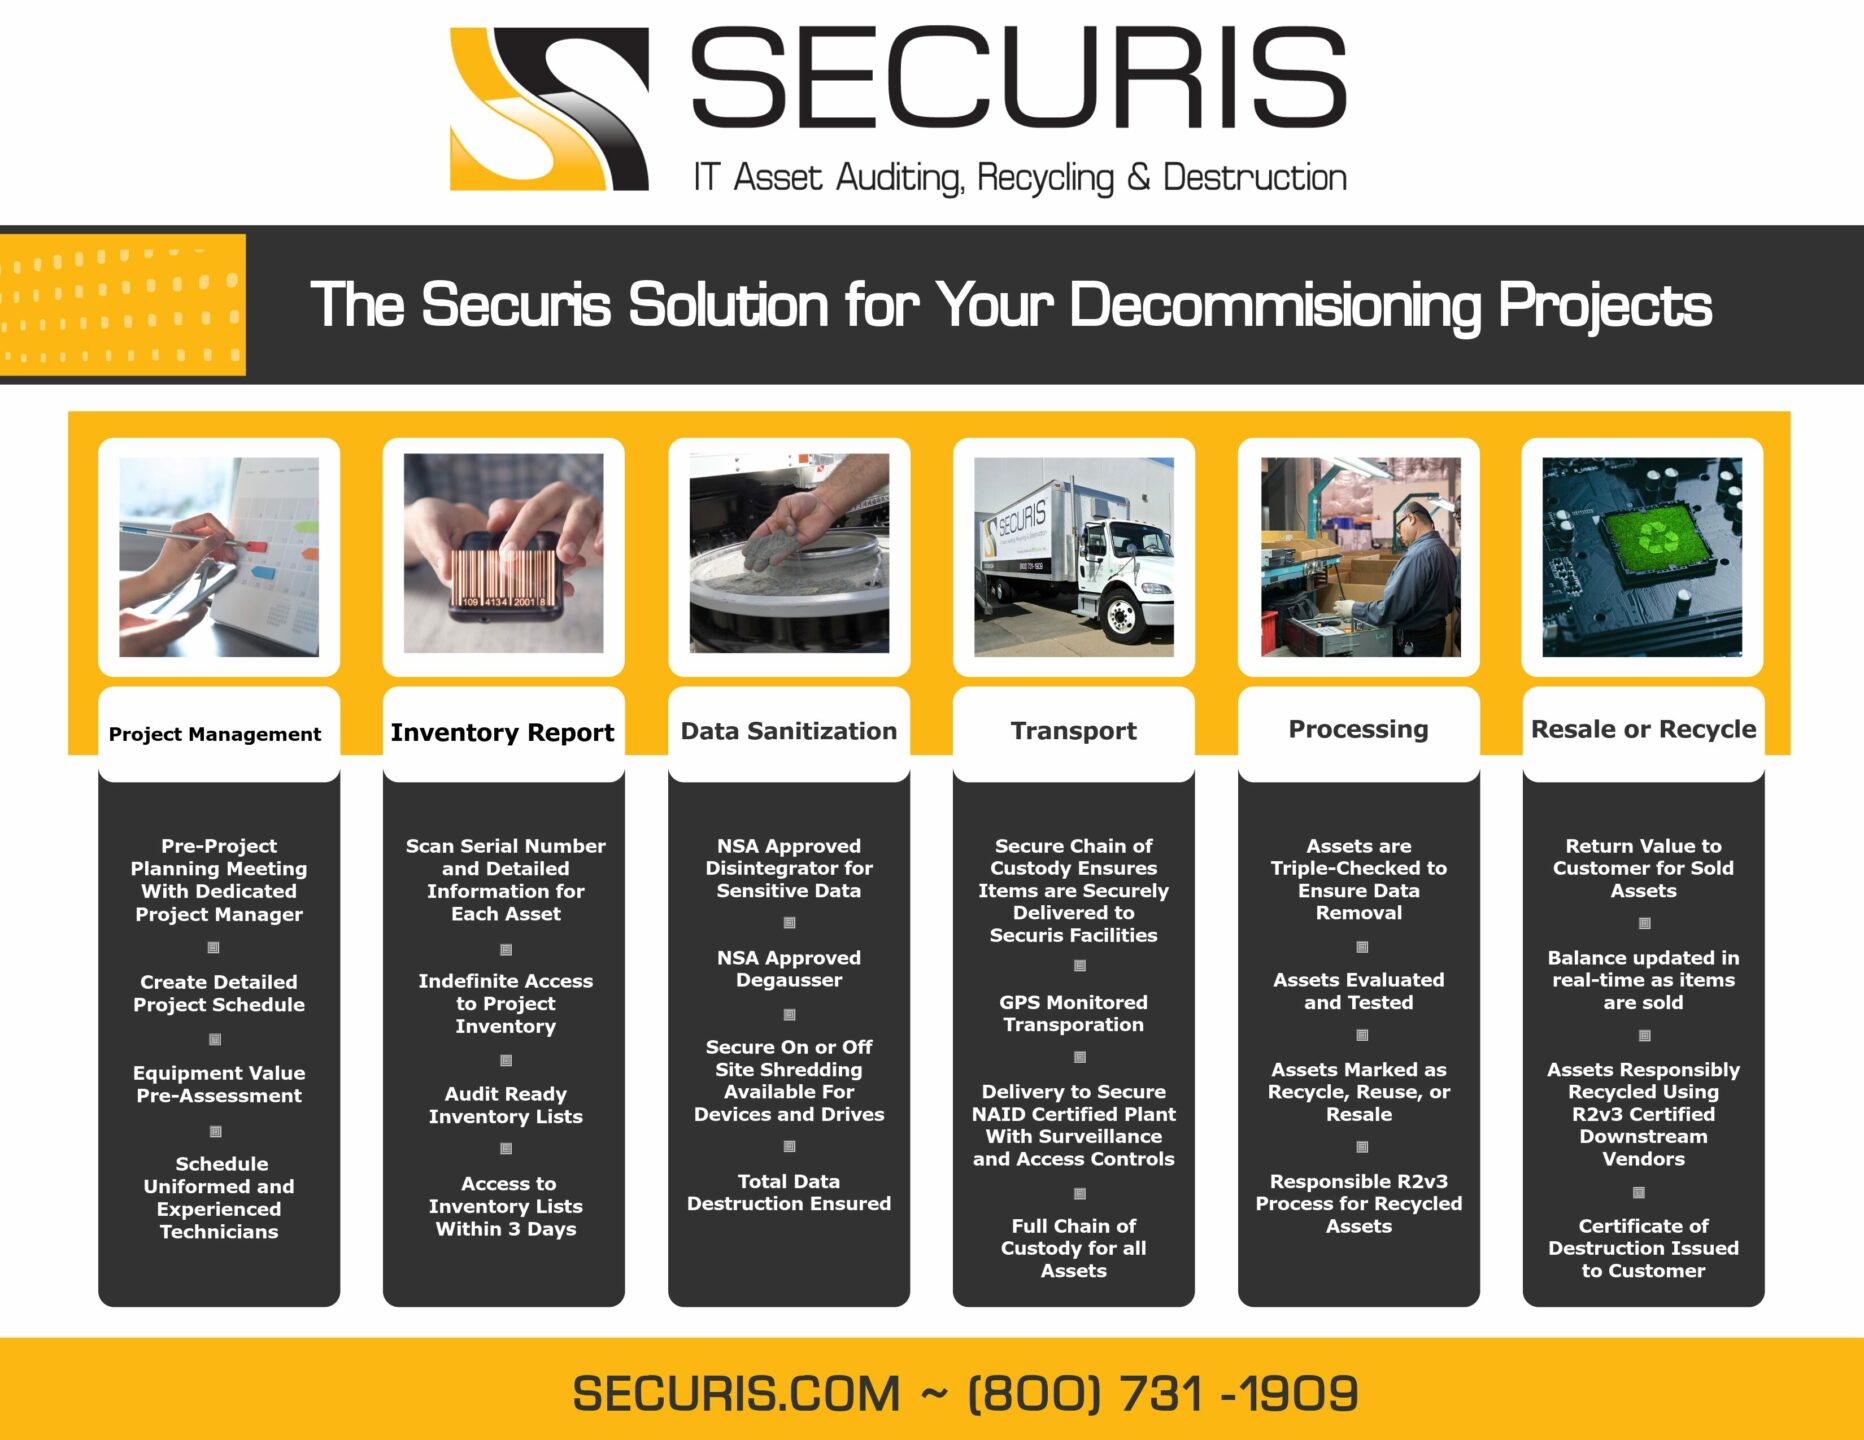 The Securis Process for Decommissioning